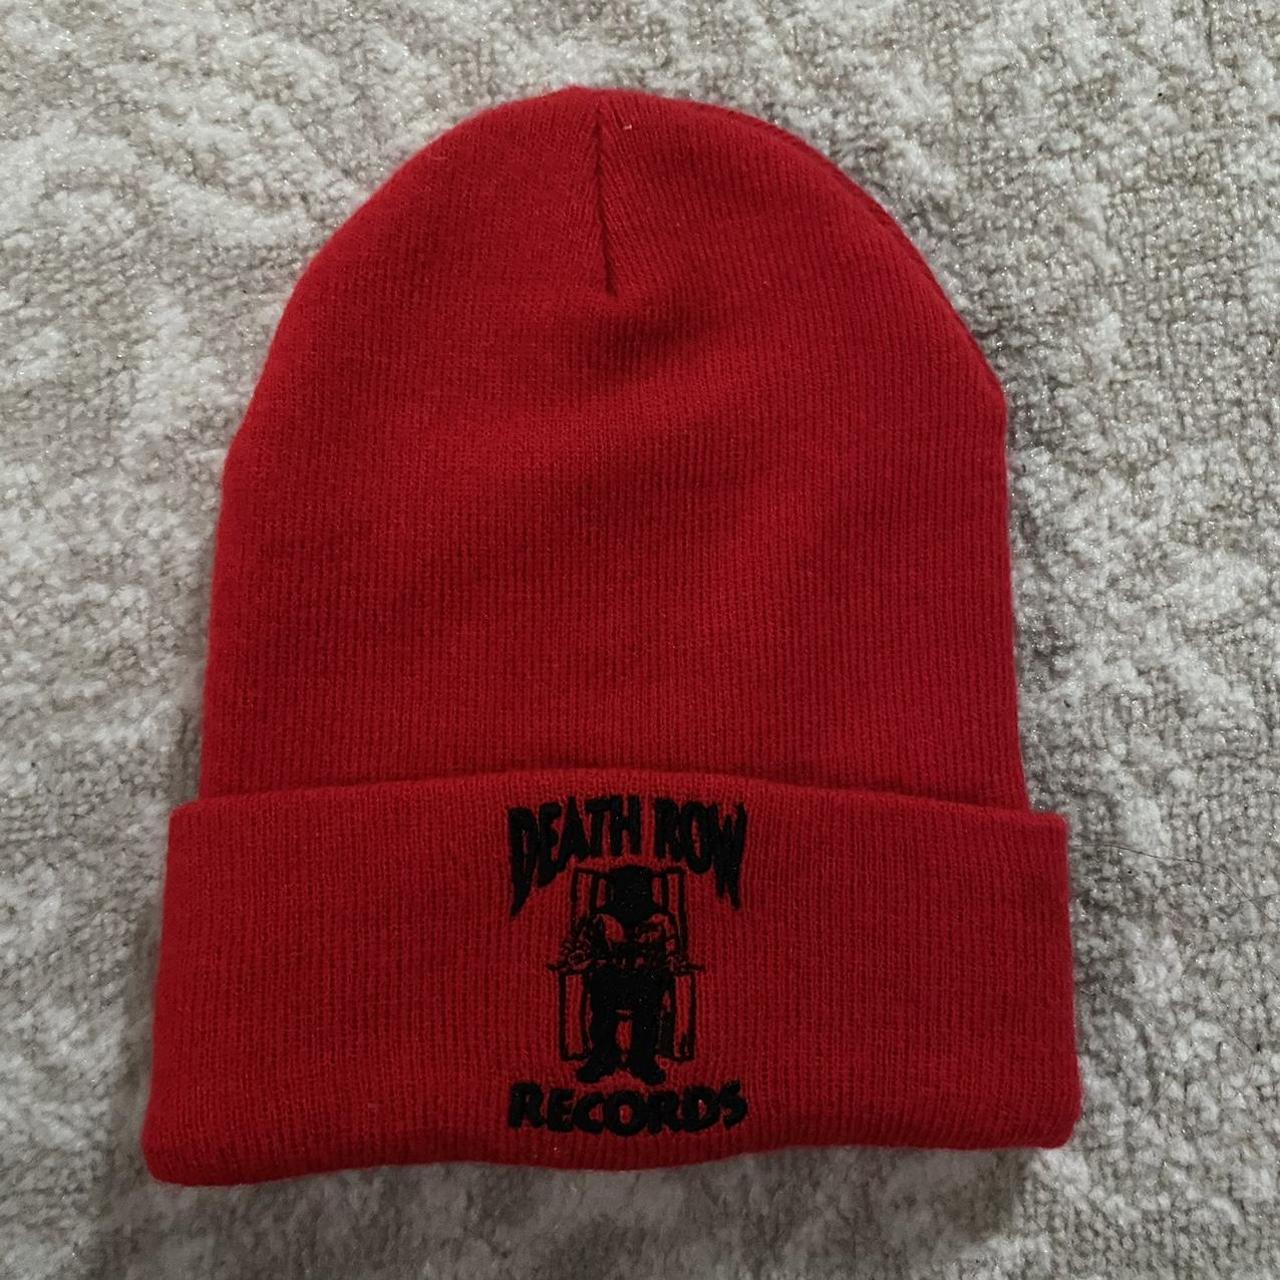 PacSun Men's Red and Black Hat